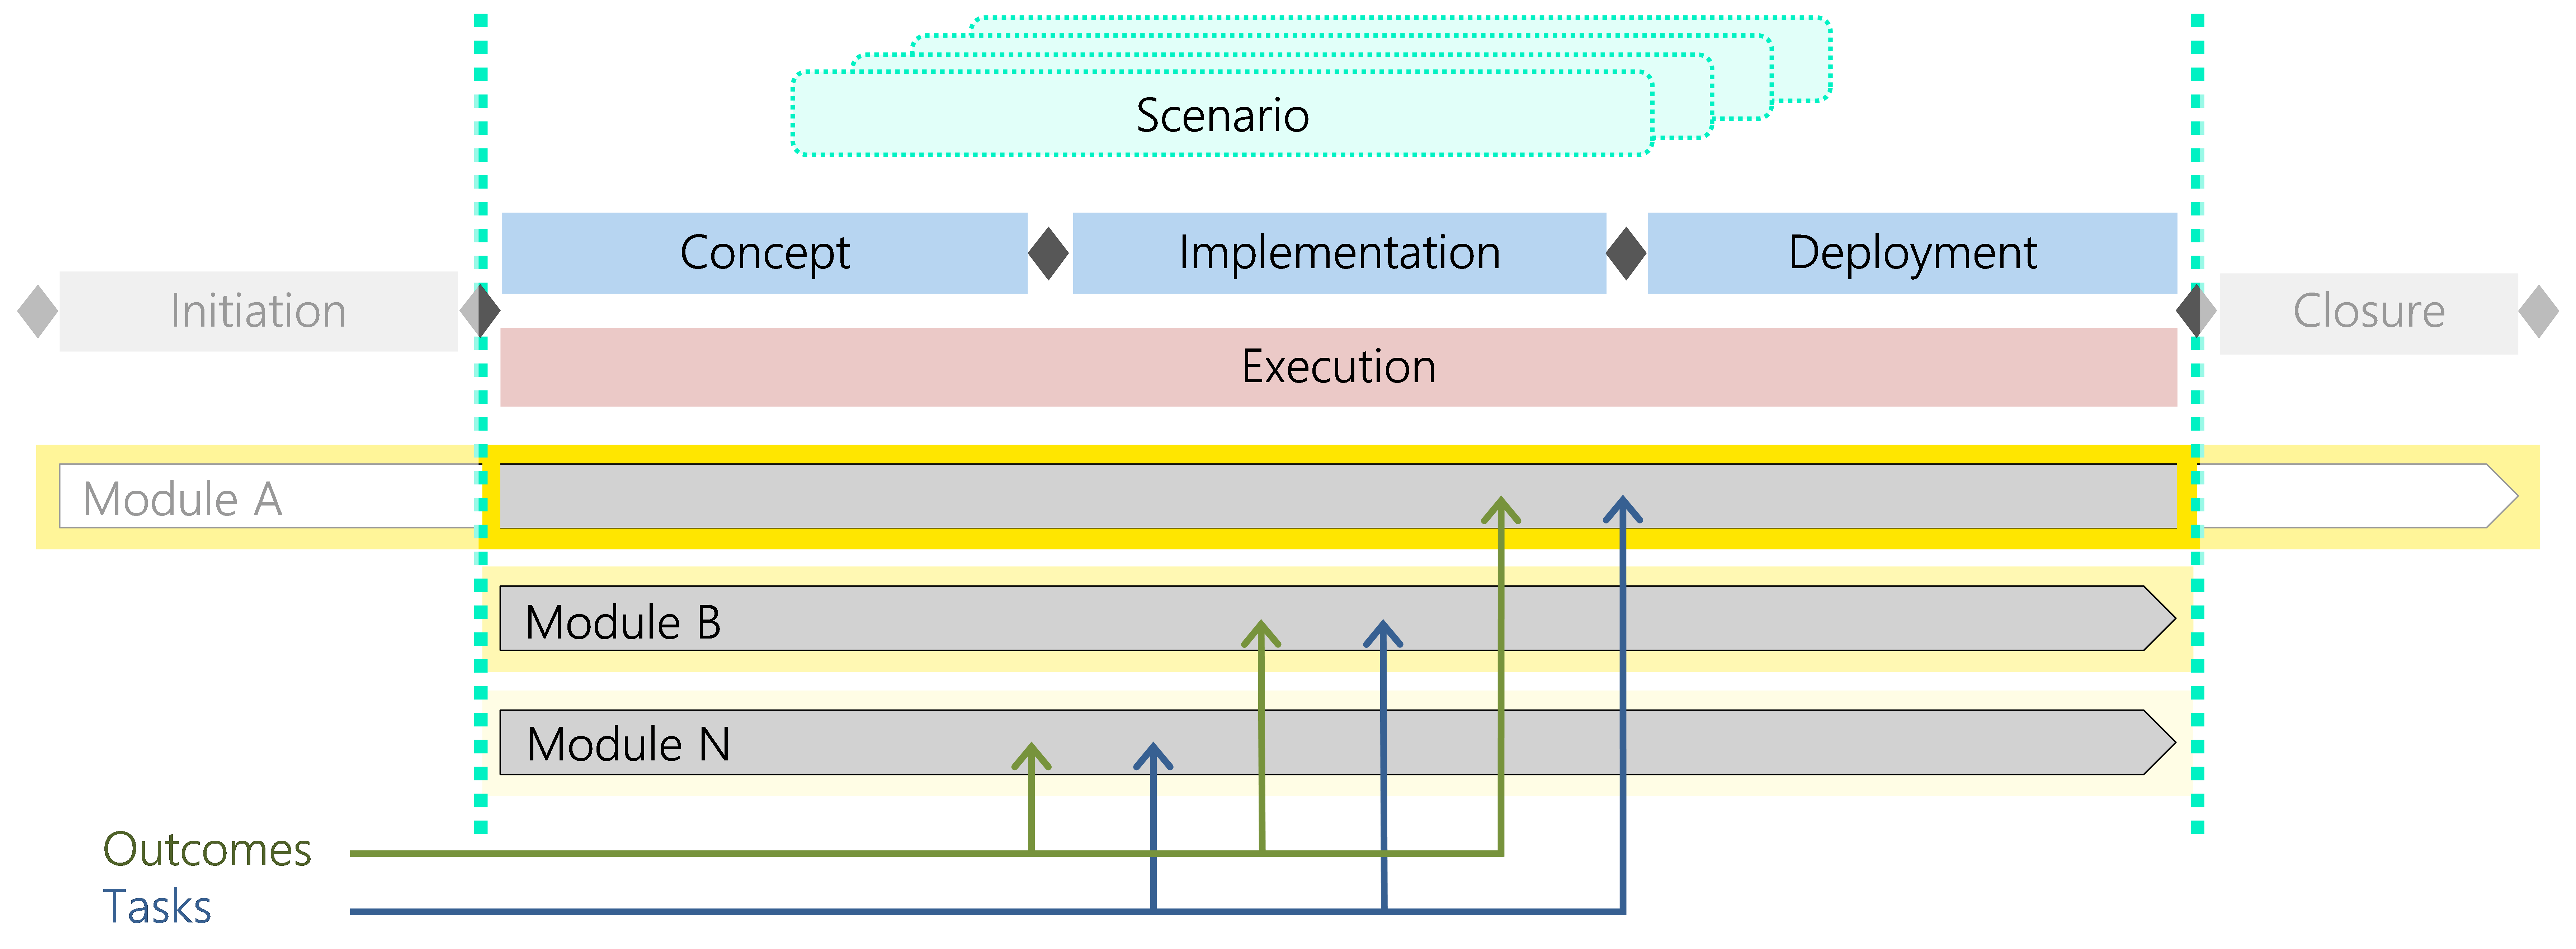 Figure 18: Multiple modules with tasks and outcomes as the basis for a scenario